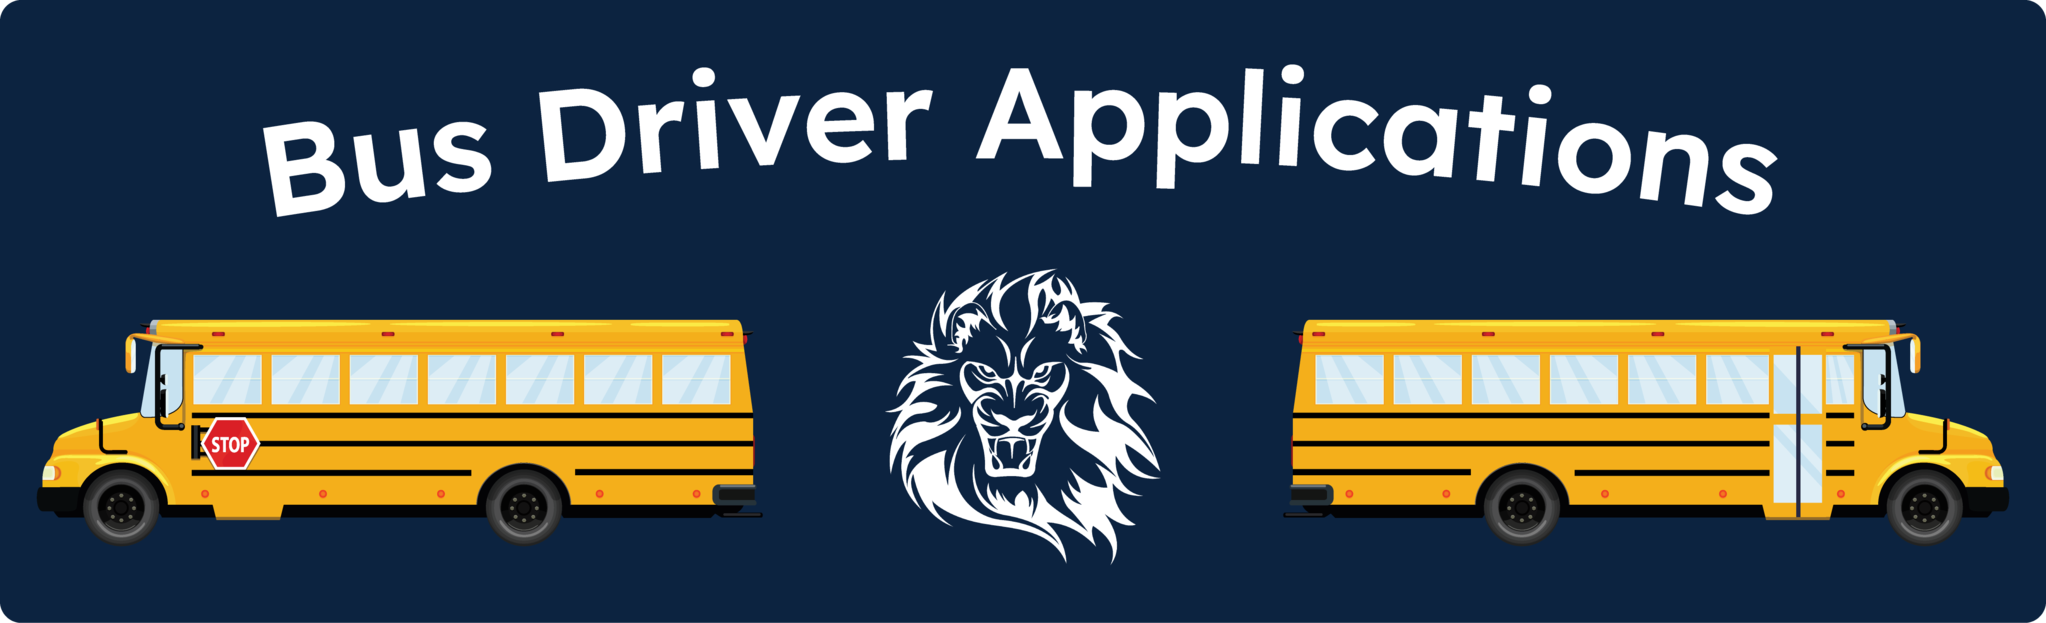 Bus Driver Applications